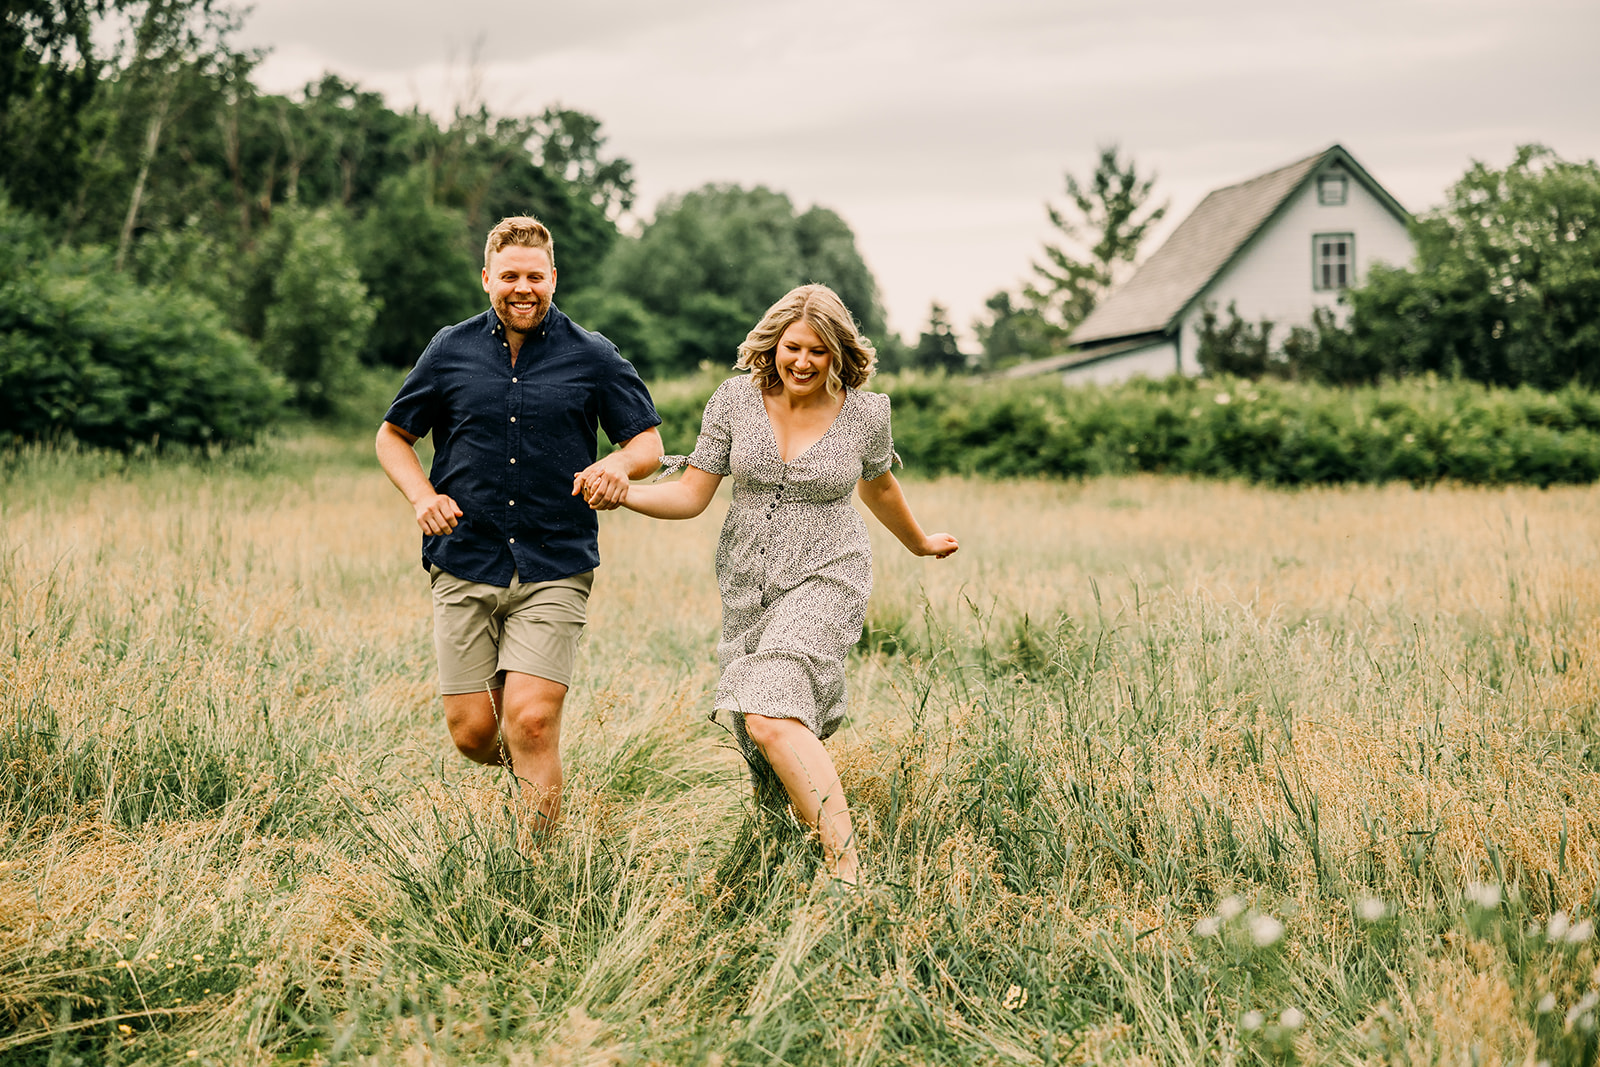 Loving couple captures precious moments in the field